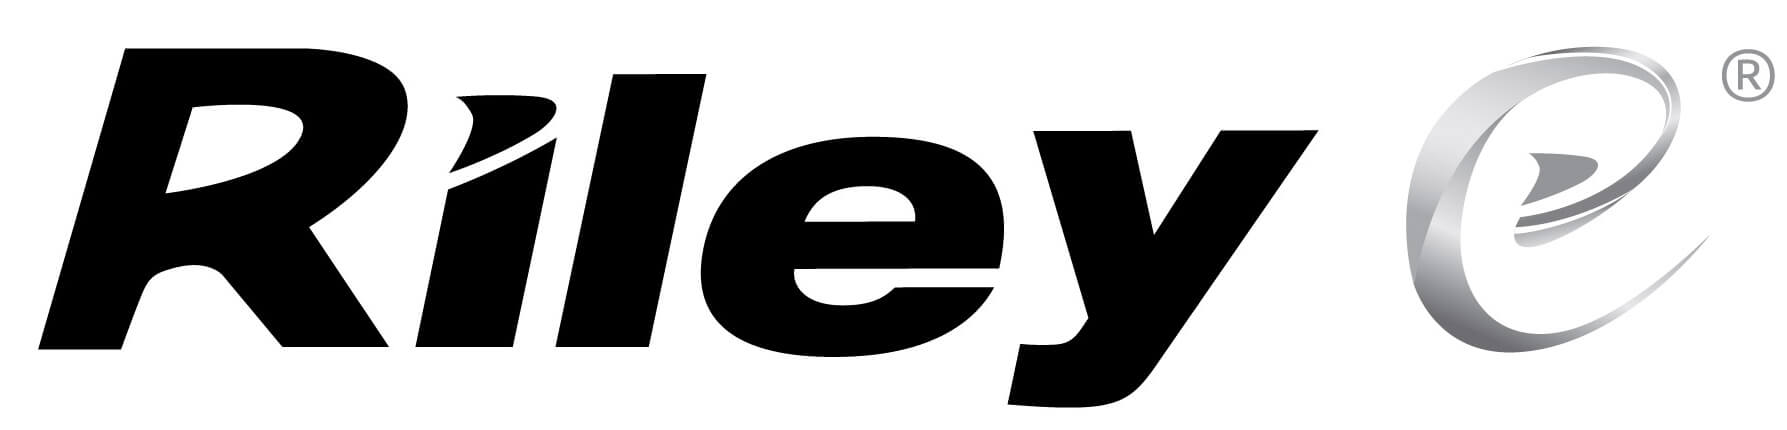 Riley Logo - Introducing Riley® - A Brand New Range of High Performance Safety ...